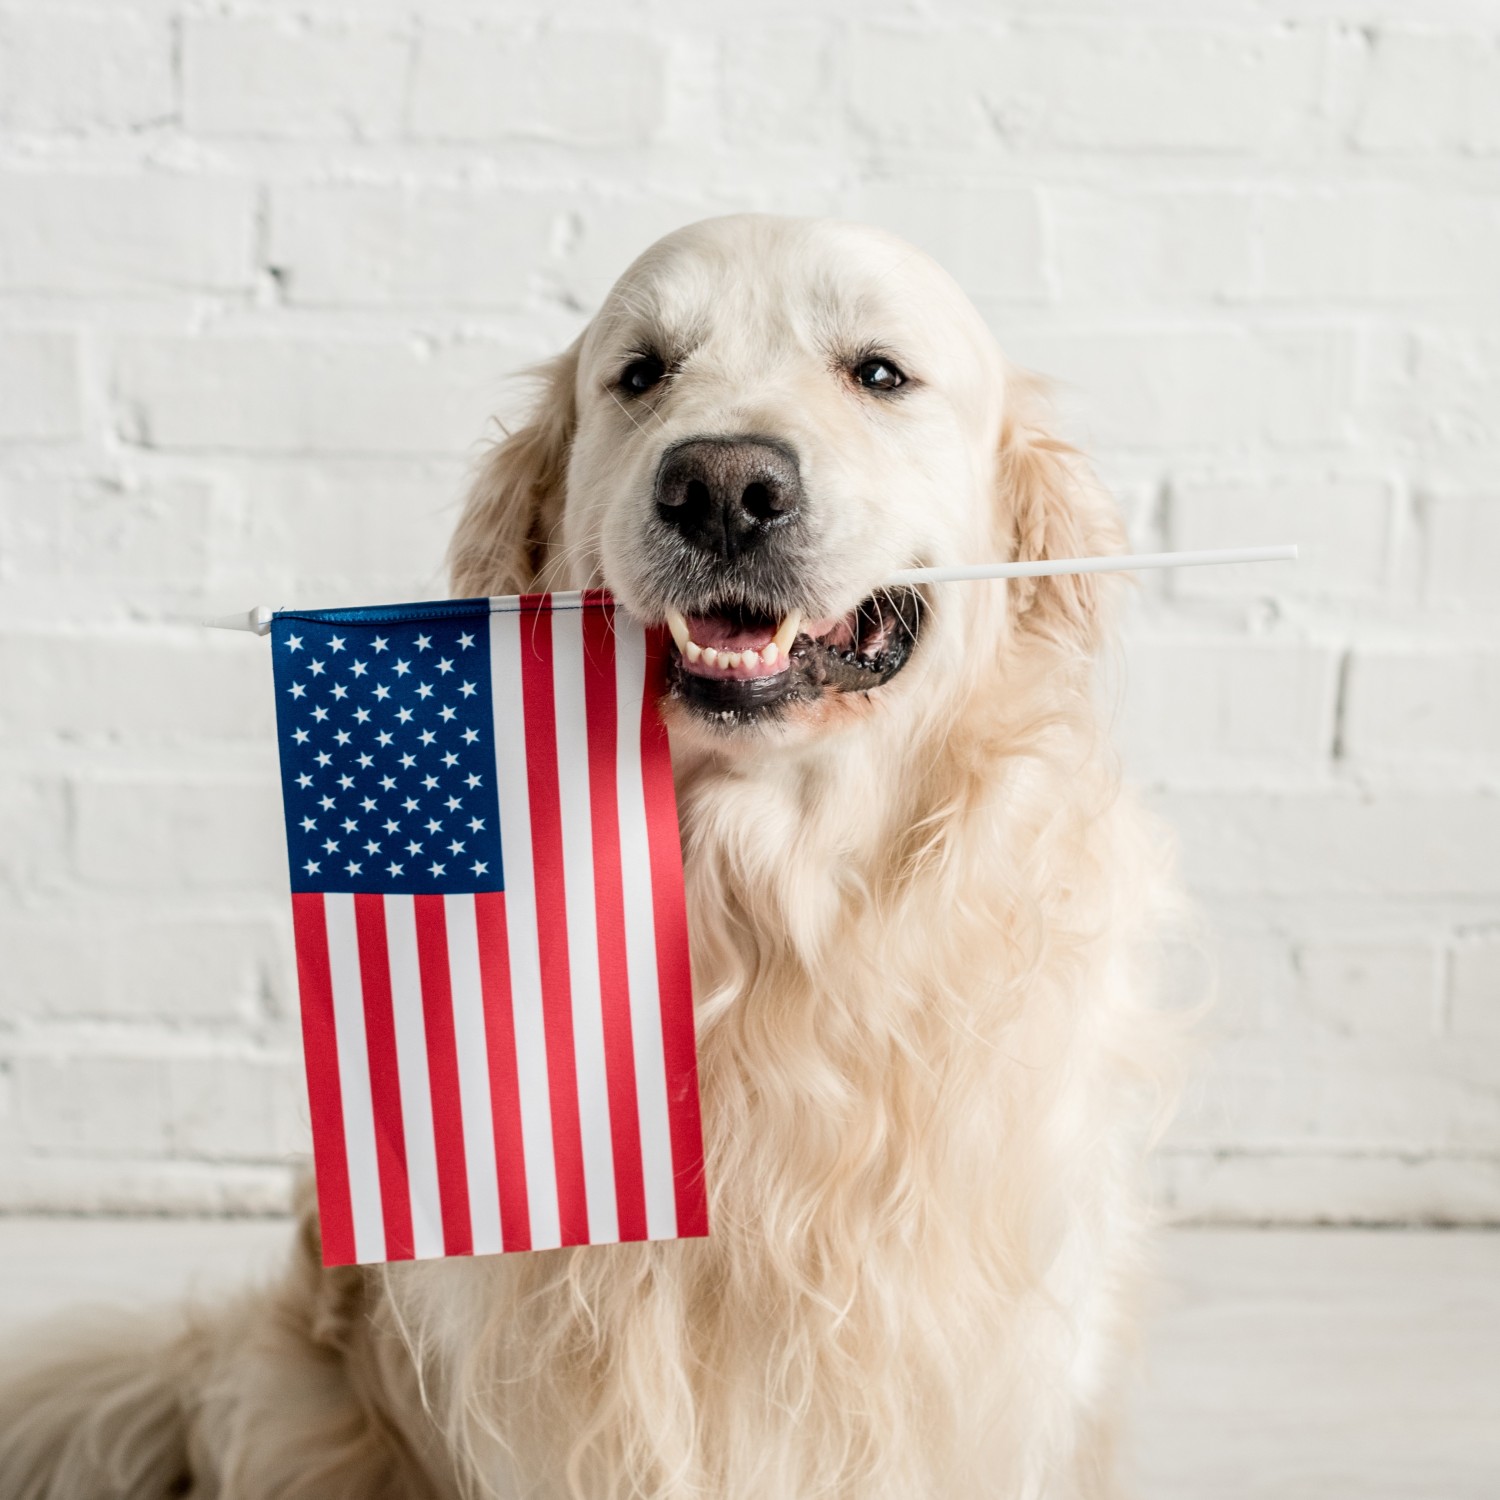 Dog with American flag